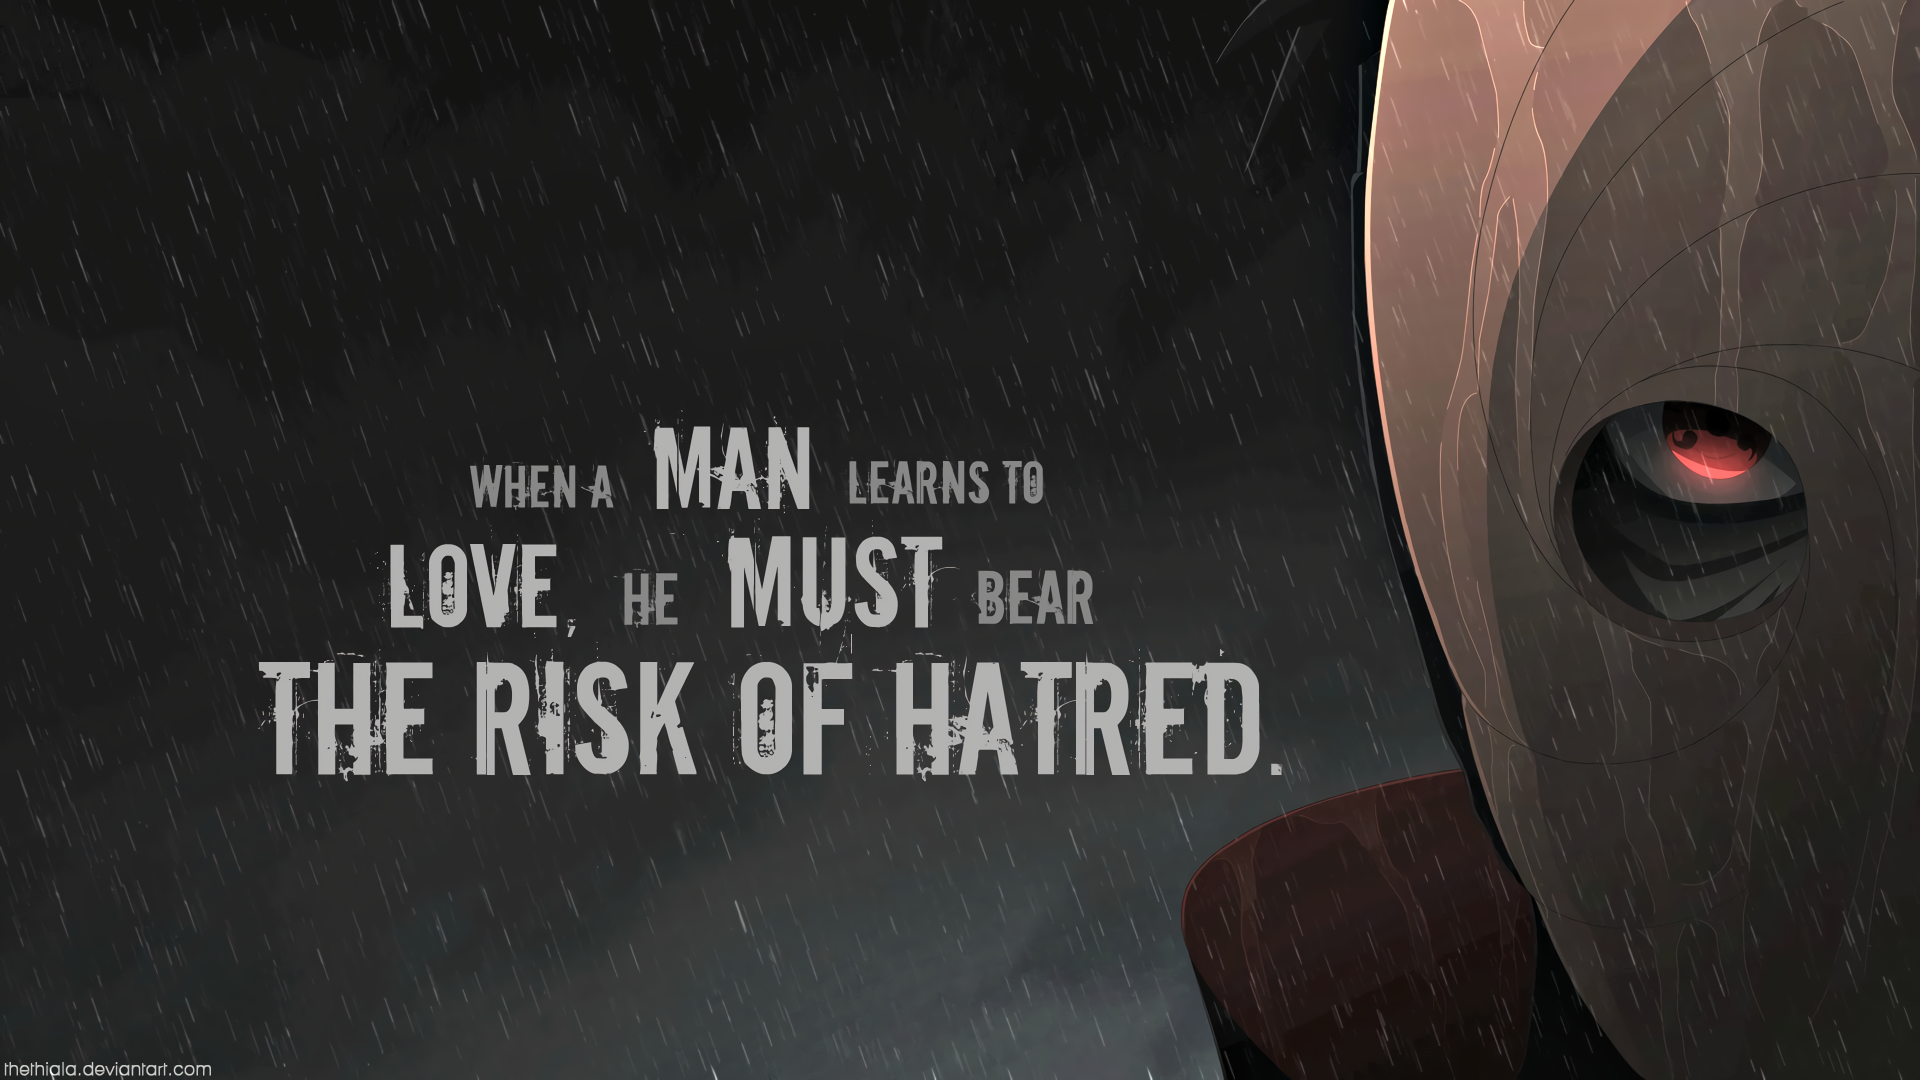 Wallpaper : 1440x900 px, anime, quote 1440x900 - wallhaven - 1184139 - HD  Wallpapers - WallHere